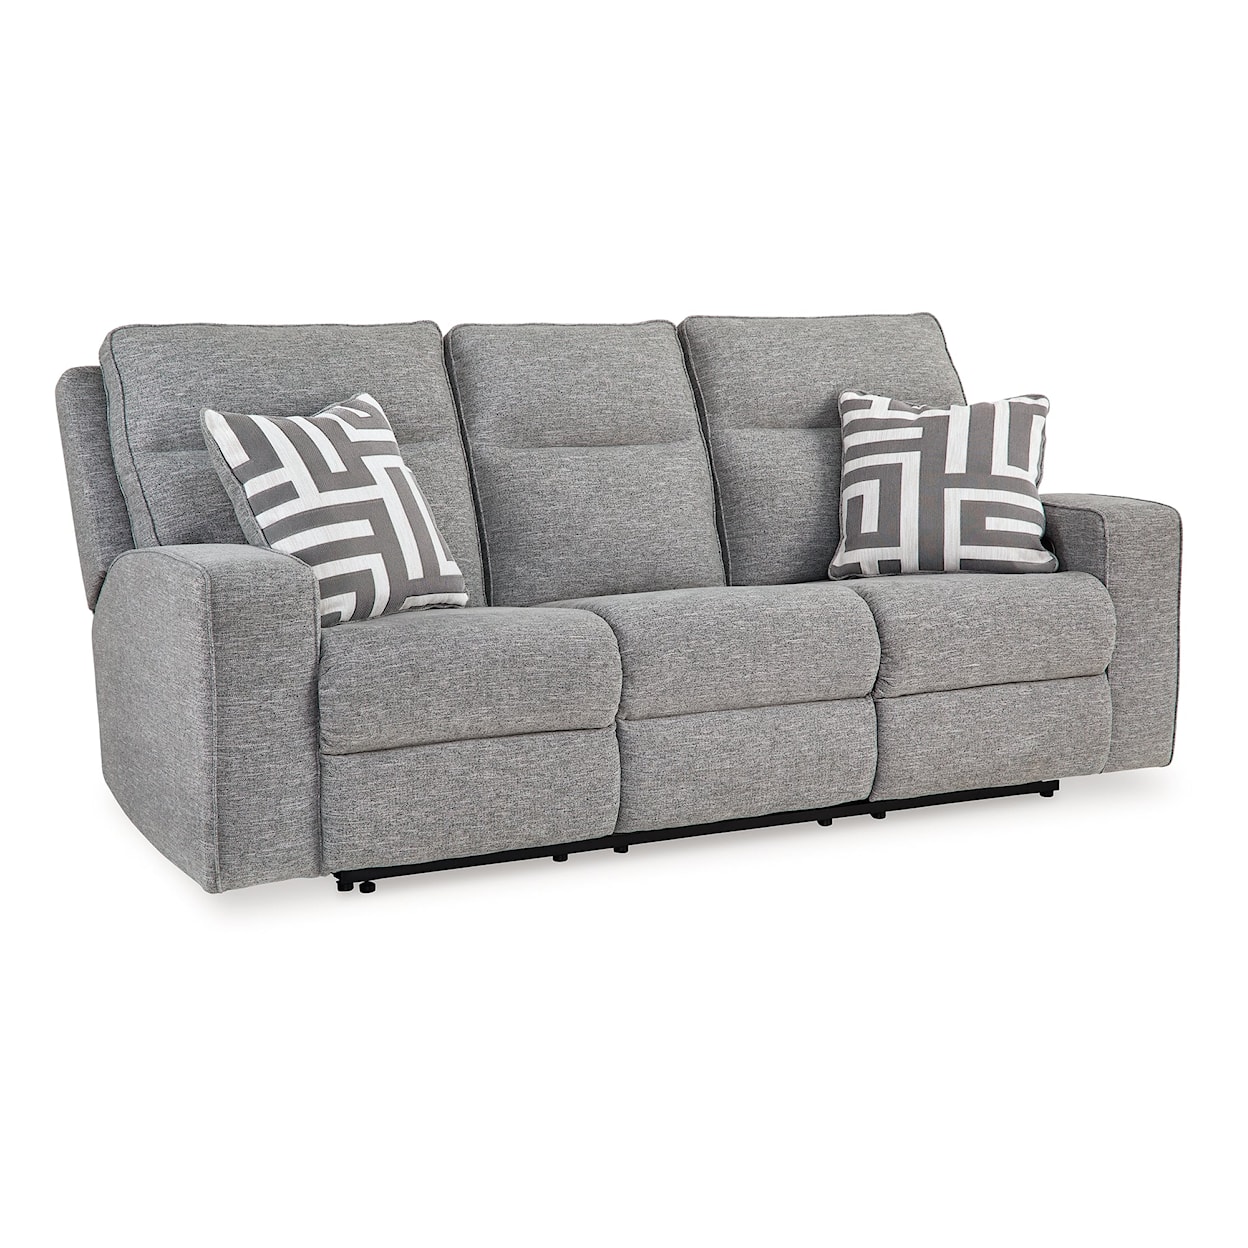 Signature Design by Ashley Biscoe Power Reclining Sofa